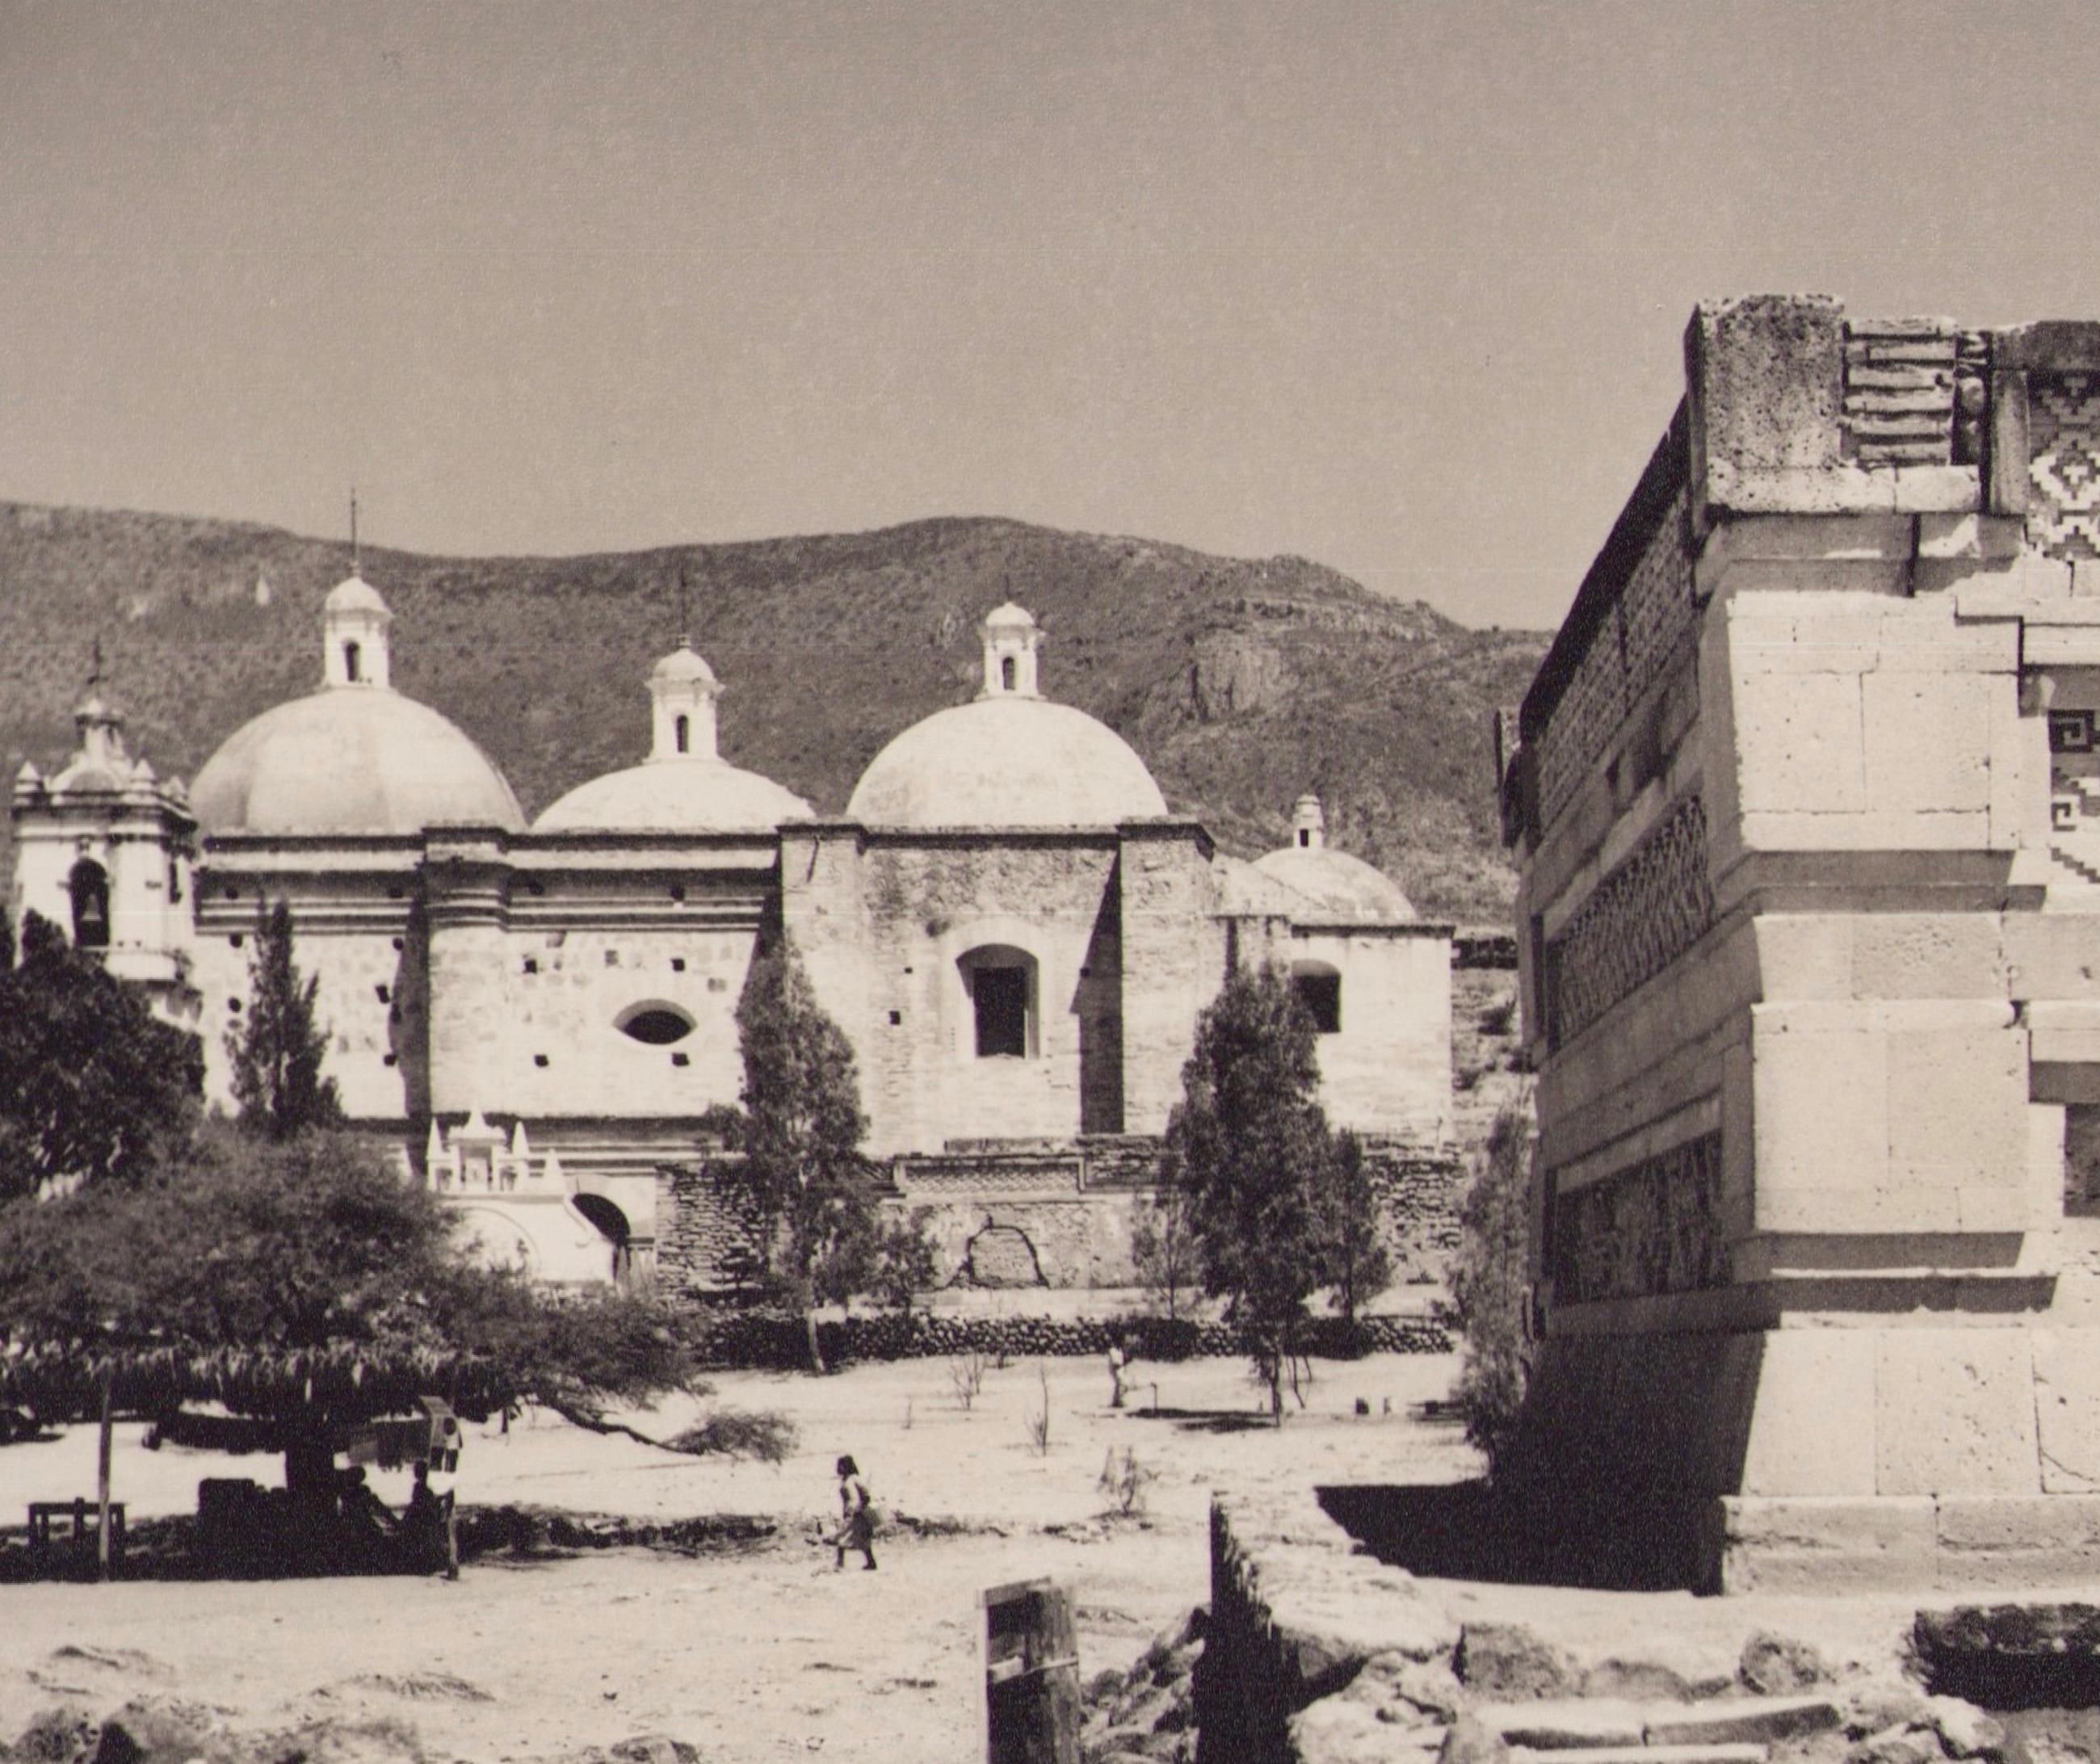 Mexico, Ruins, Mitla, Black and White Photography, 1960s, 17, 1 x 23, 2 cm - Brown Portrait Photograph by Hanna Seidel